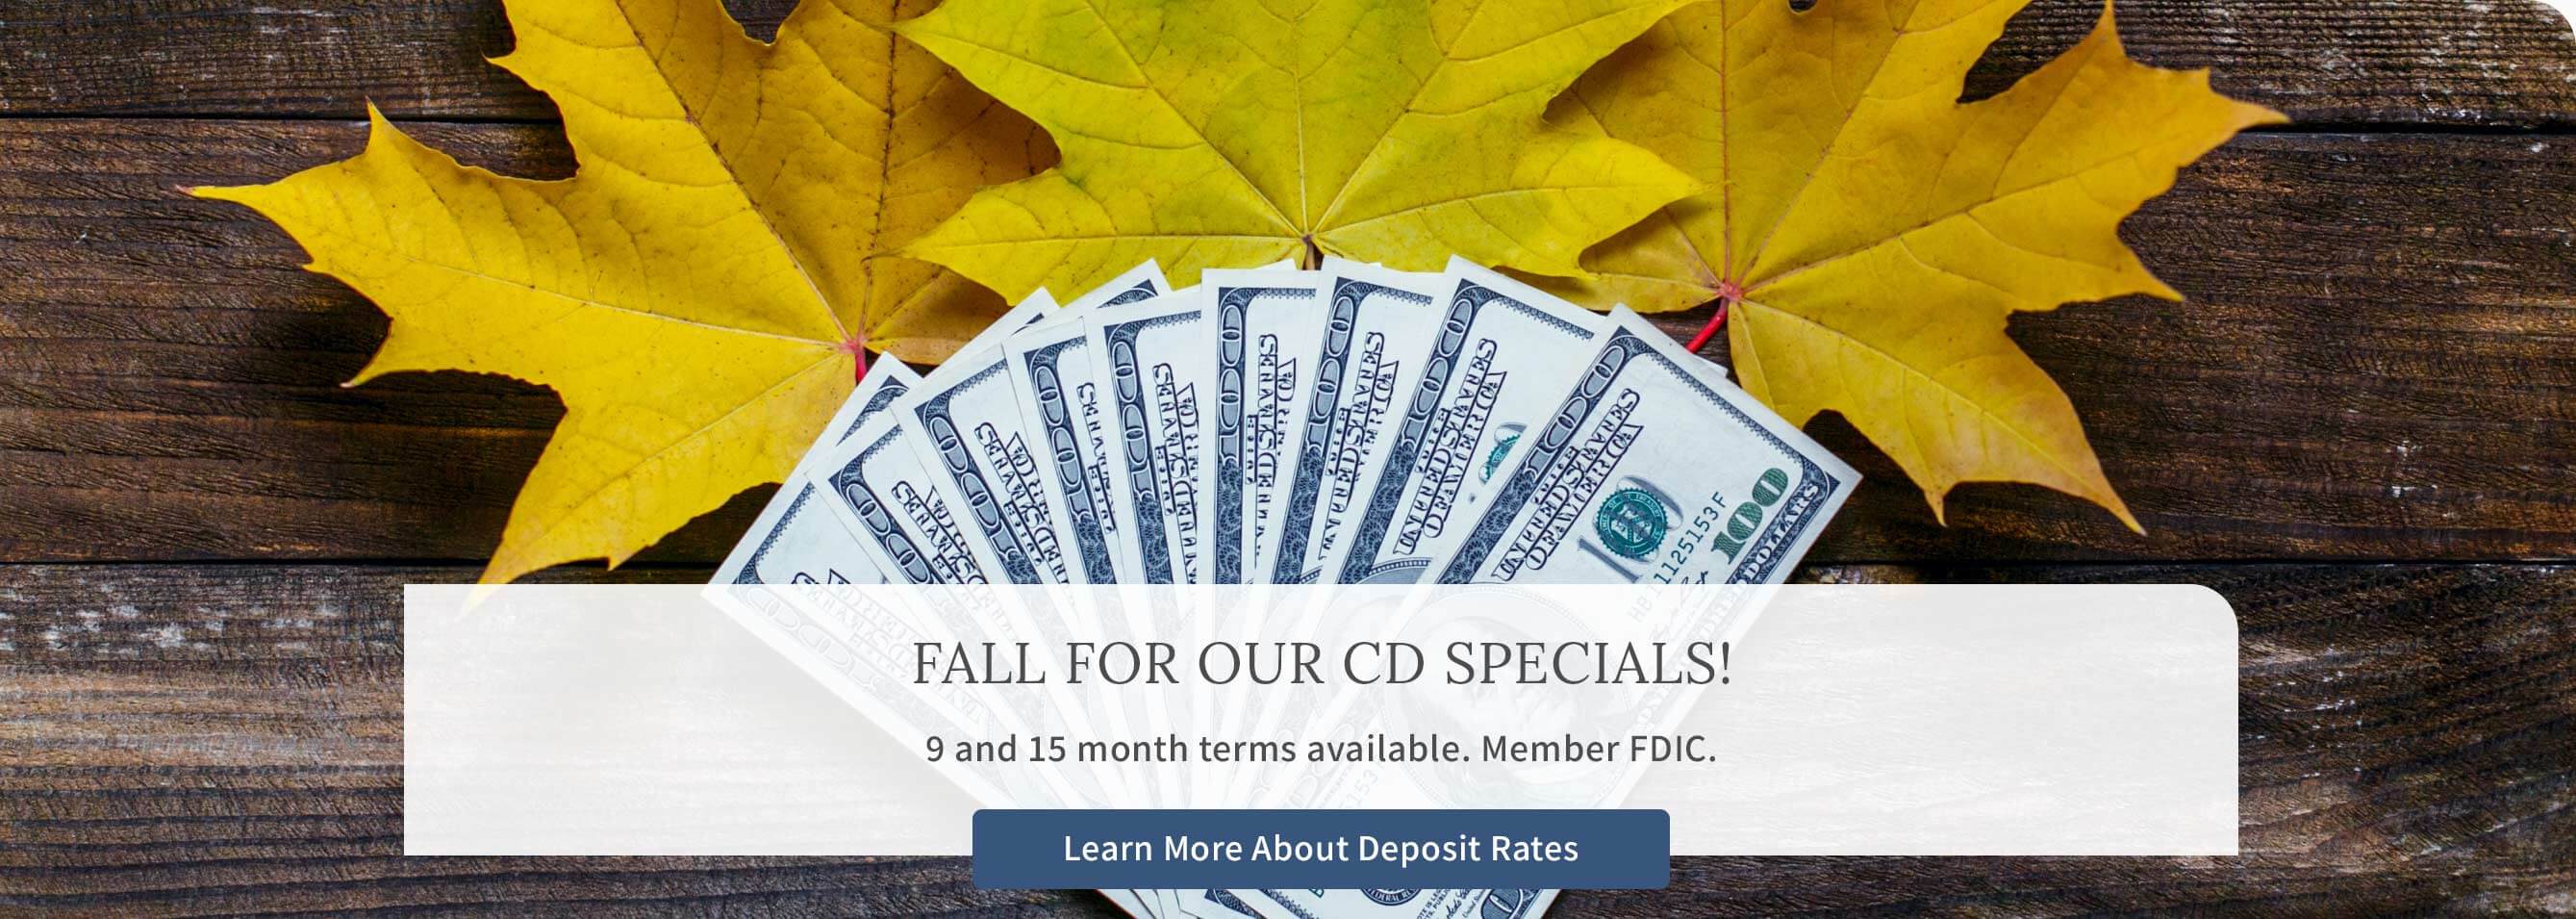 FALL FOR OUR CD SPECIALS! 9 and 15 month terms available. Member FDIC. Learn More About Deposit Rates